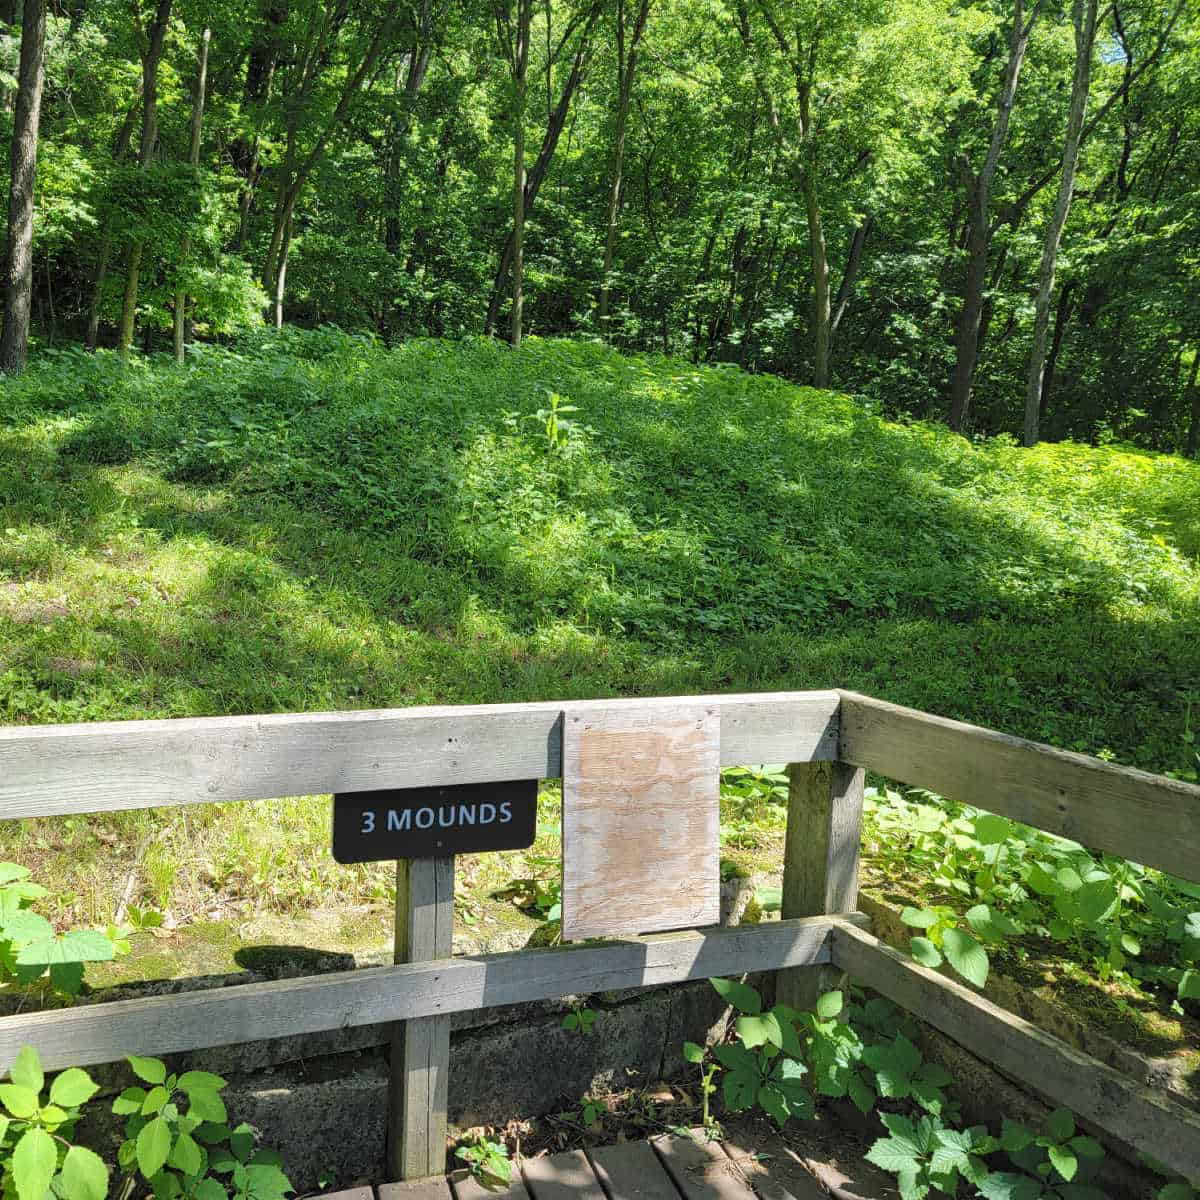 3 mounds at Effigy Mounds National Monument in Iowa